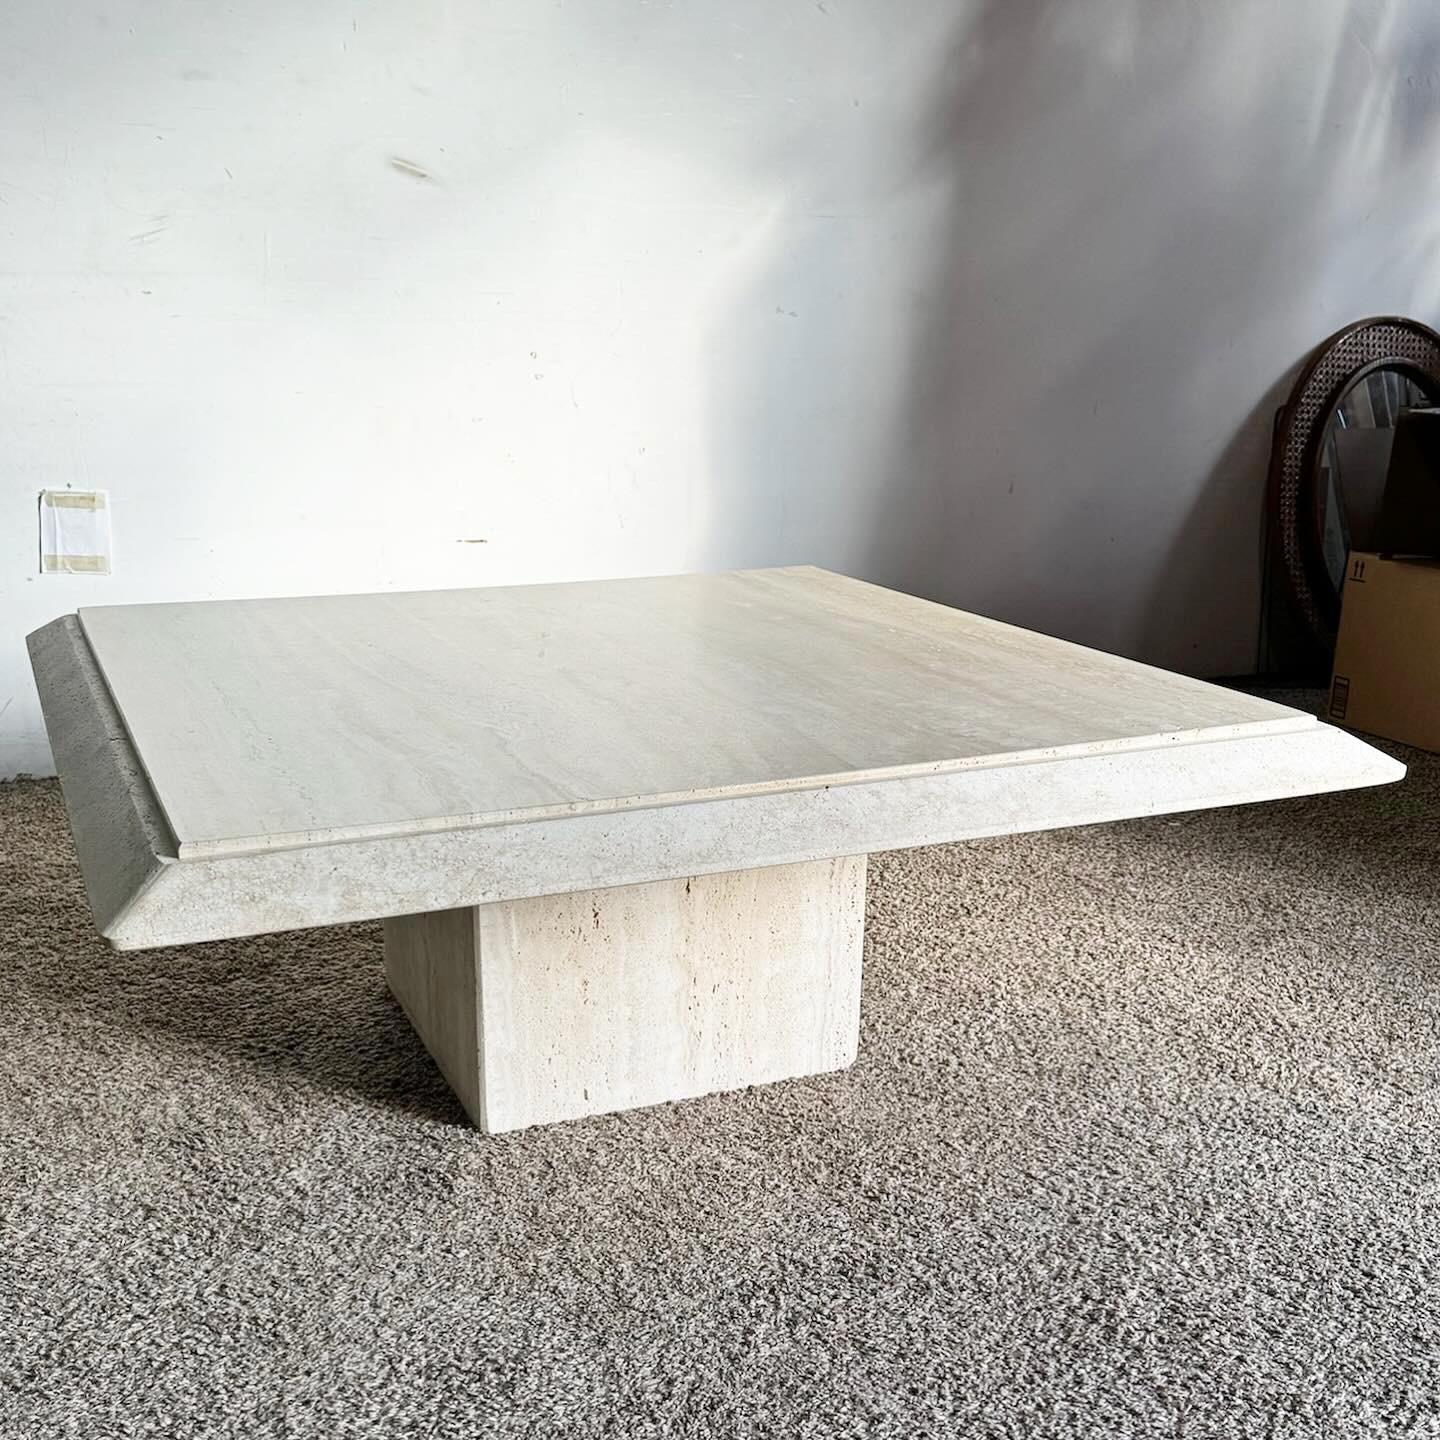 Elevate your living space with the Post-Modern Travertine Beveled Square Top Coffee Table. Crafted from exquisite travertine, this table features a beveled square top that beautifully highlights the stone's natural beauty and unique veining. Its